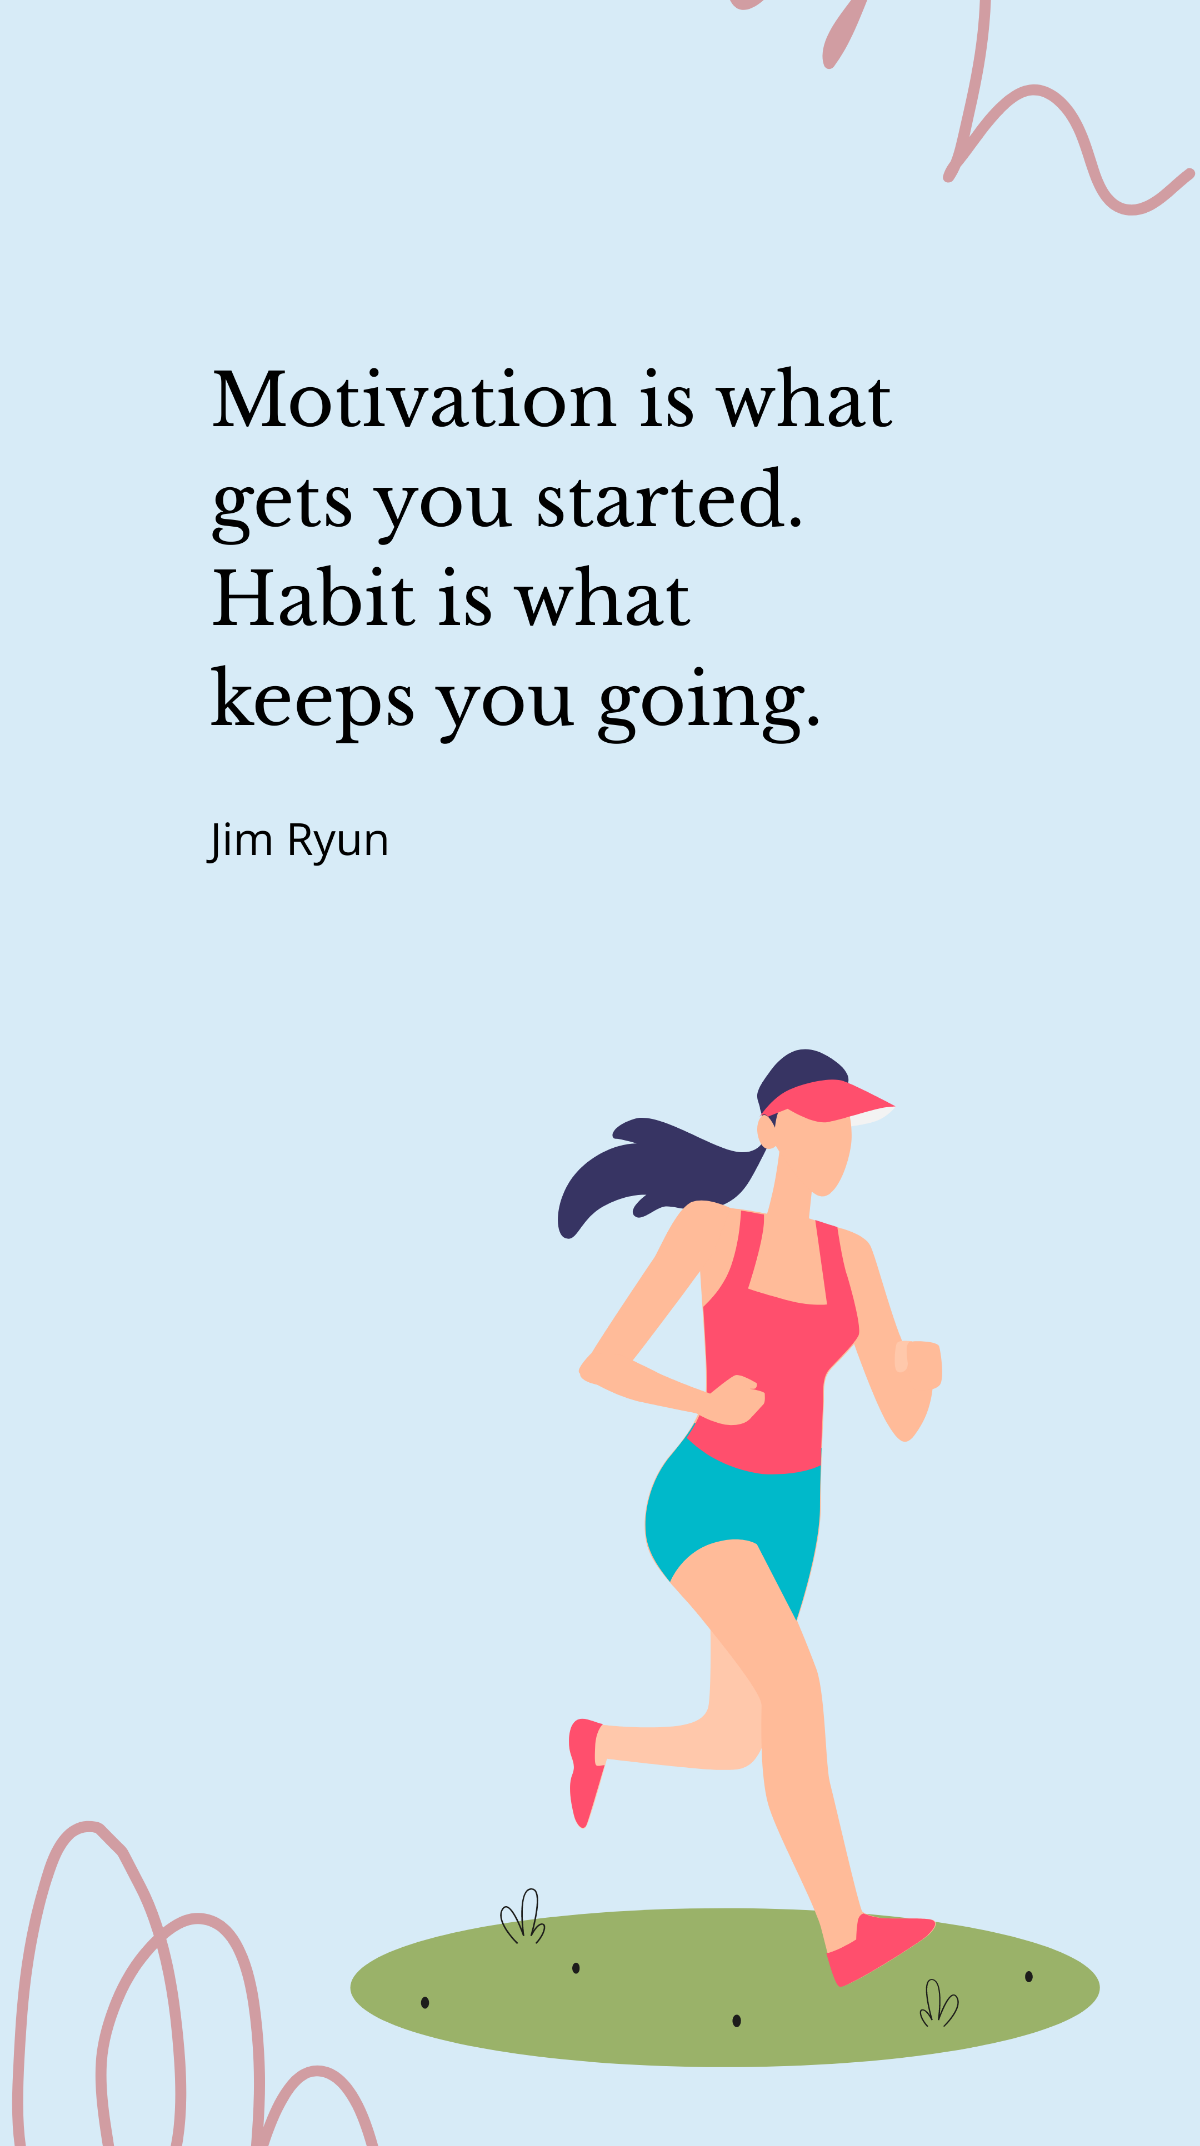 Jim Ryun - Motivation is what gets you started. Habit is what keeps you going. Template